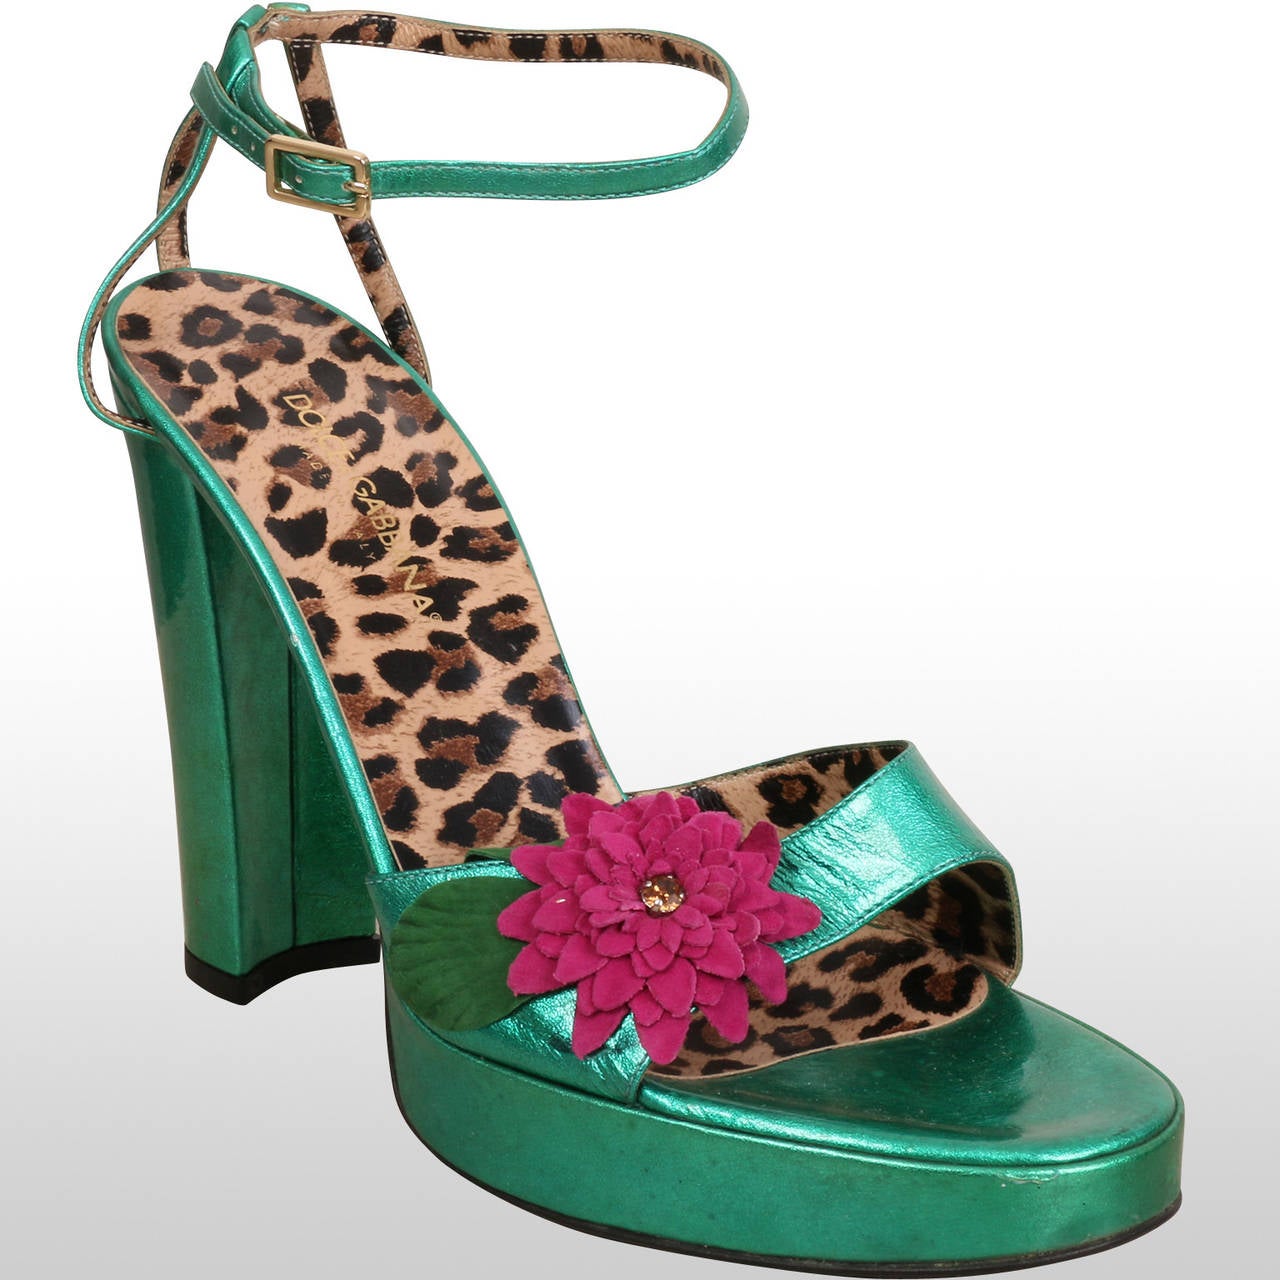 Blue Dolce and Gabbana Green Metallic Platform Sandals with Flower For Sale